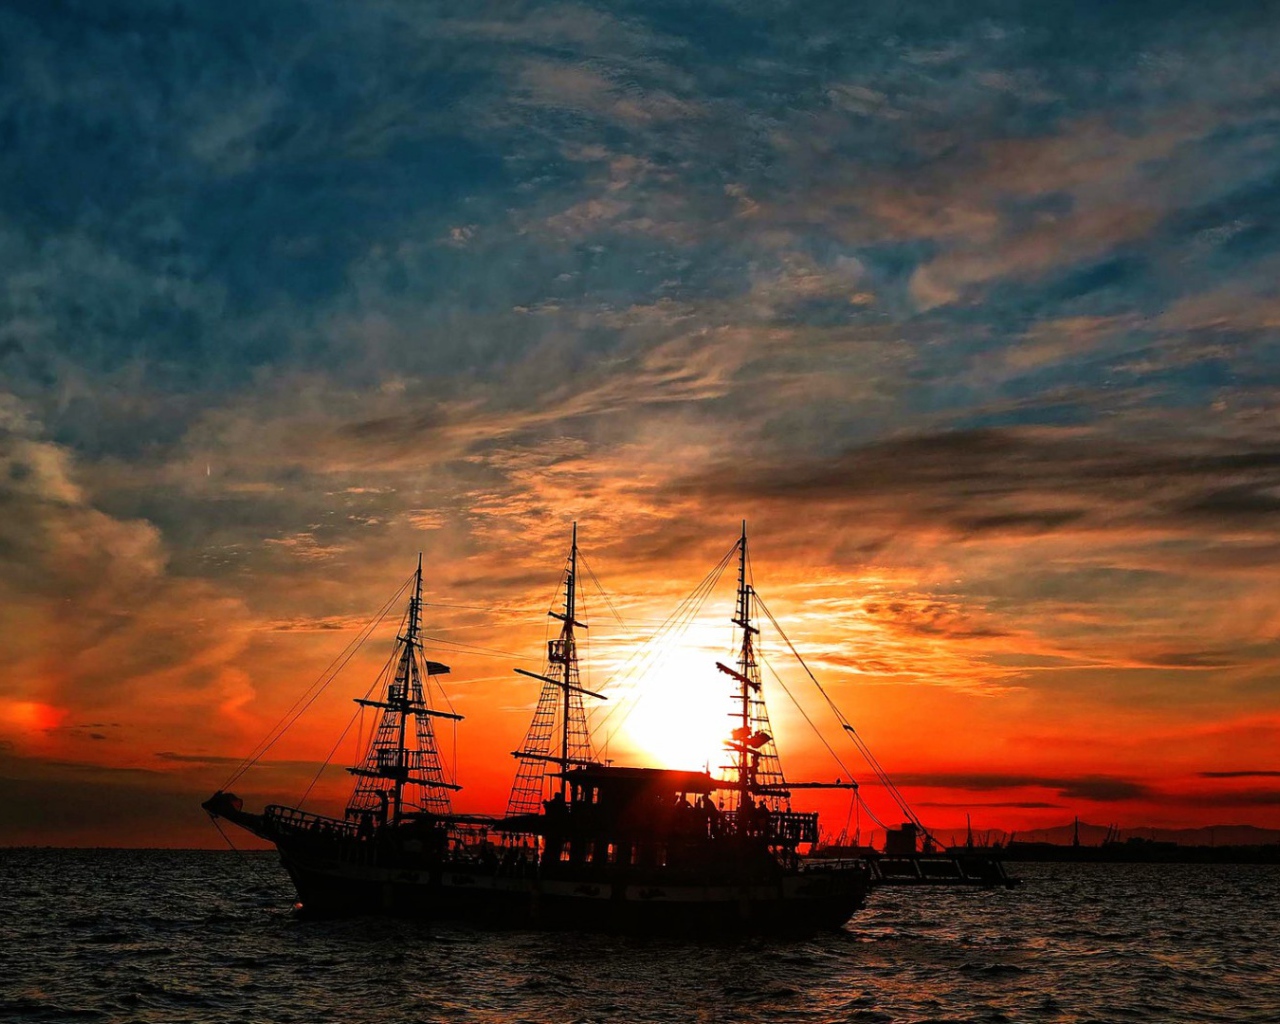 The ship in the rays of the setting sun 